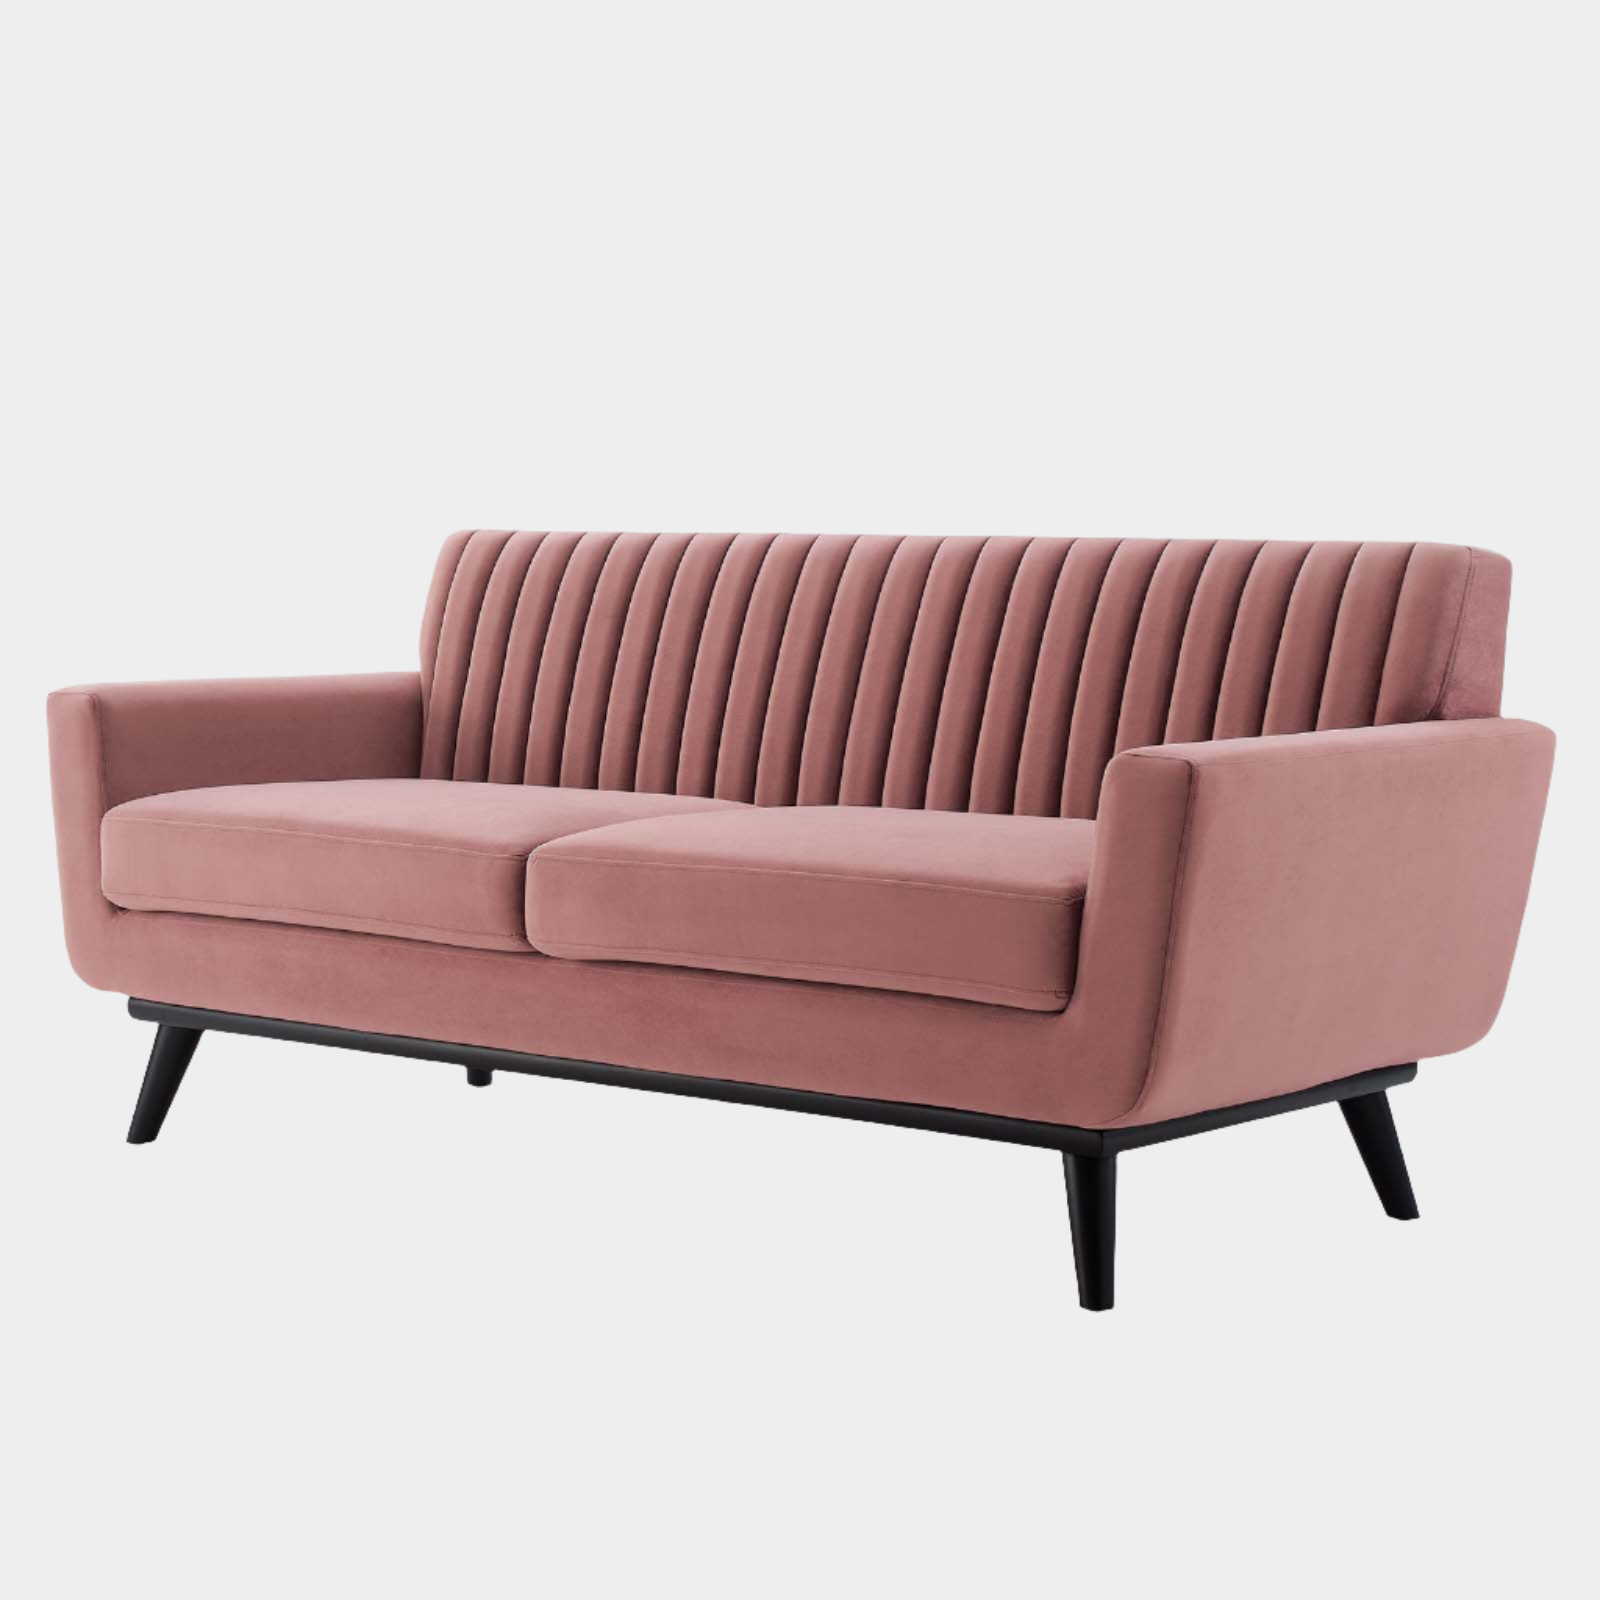 Gage Channel Tufted Fabric Sofa